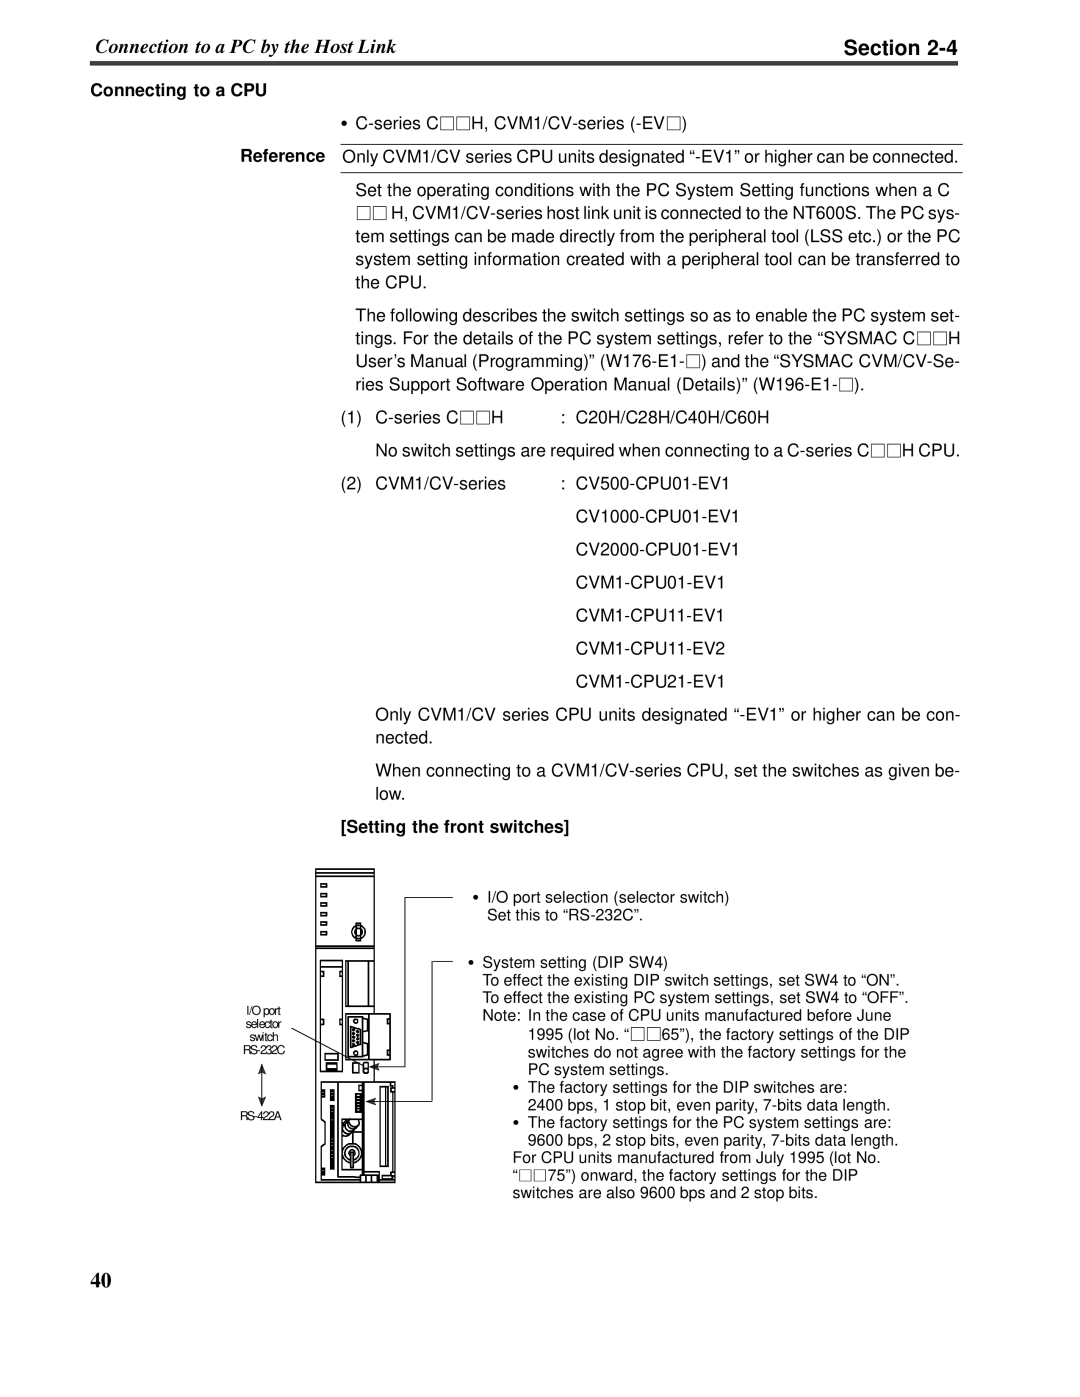 Omron V022-E3-1 operation manual Section, Connecting to a CPU, Setting the frontswitches 